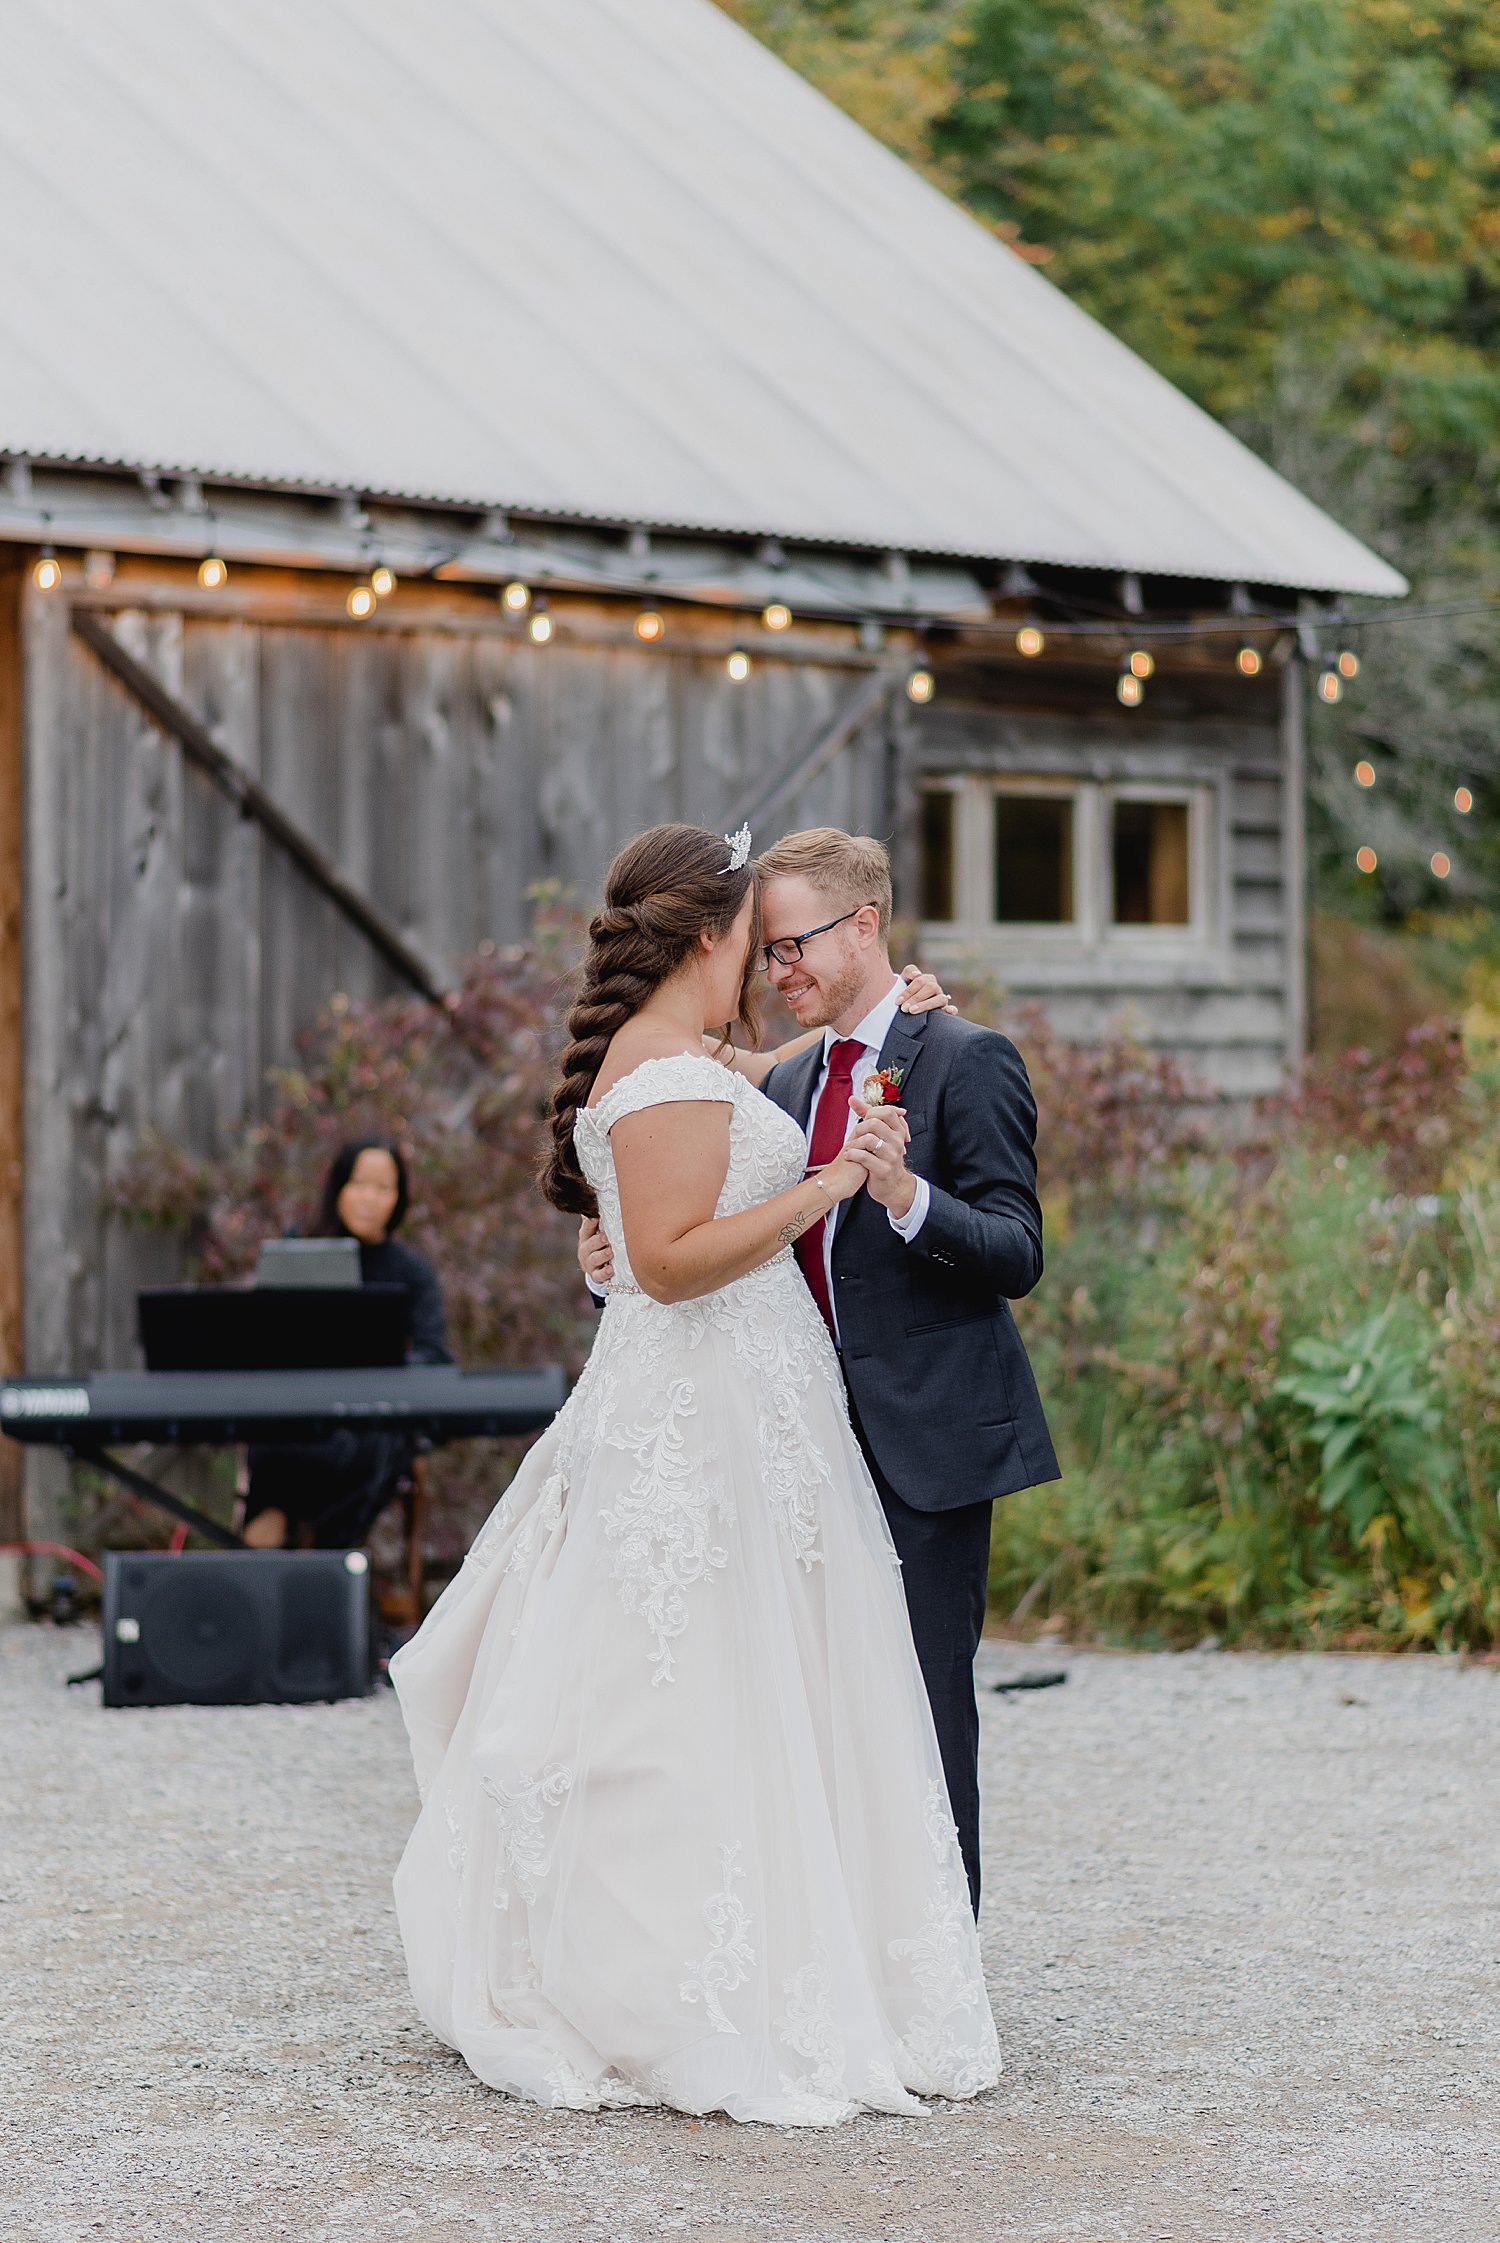 Compass Rose - Prince Edward County Wedding Venues | Holly McMurter Photographs_0010.jpg